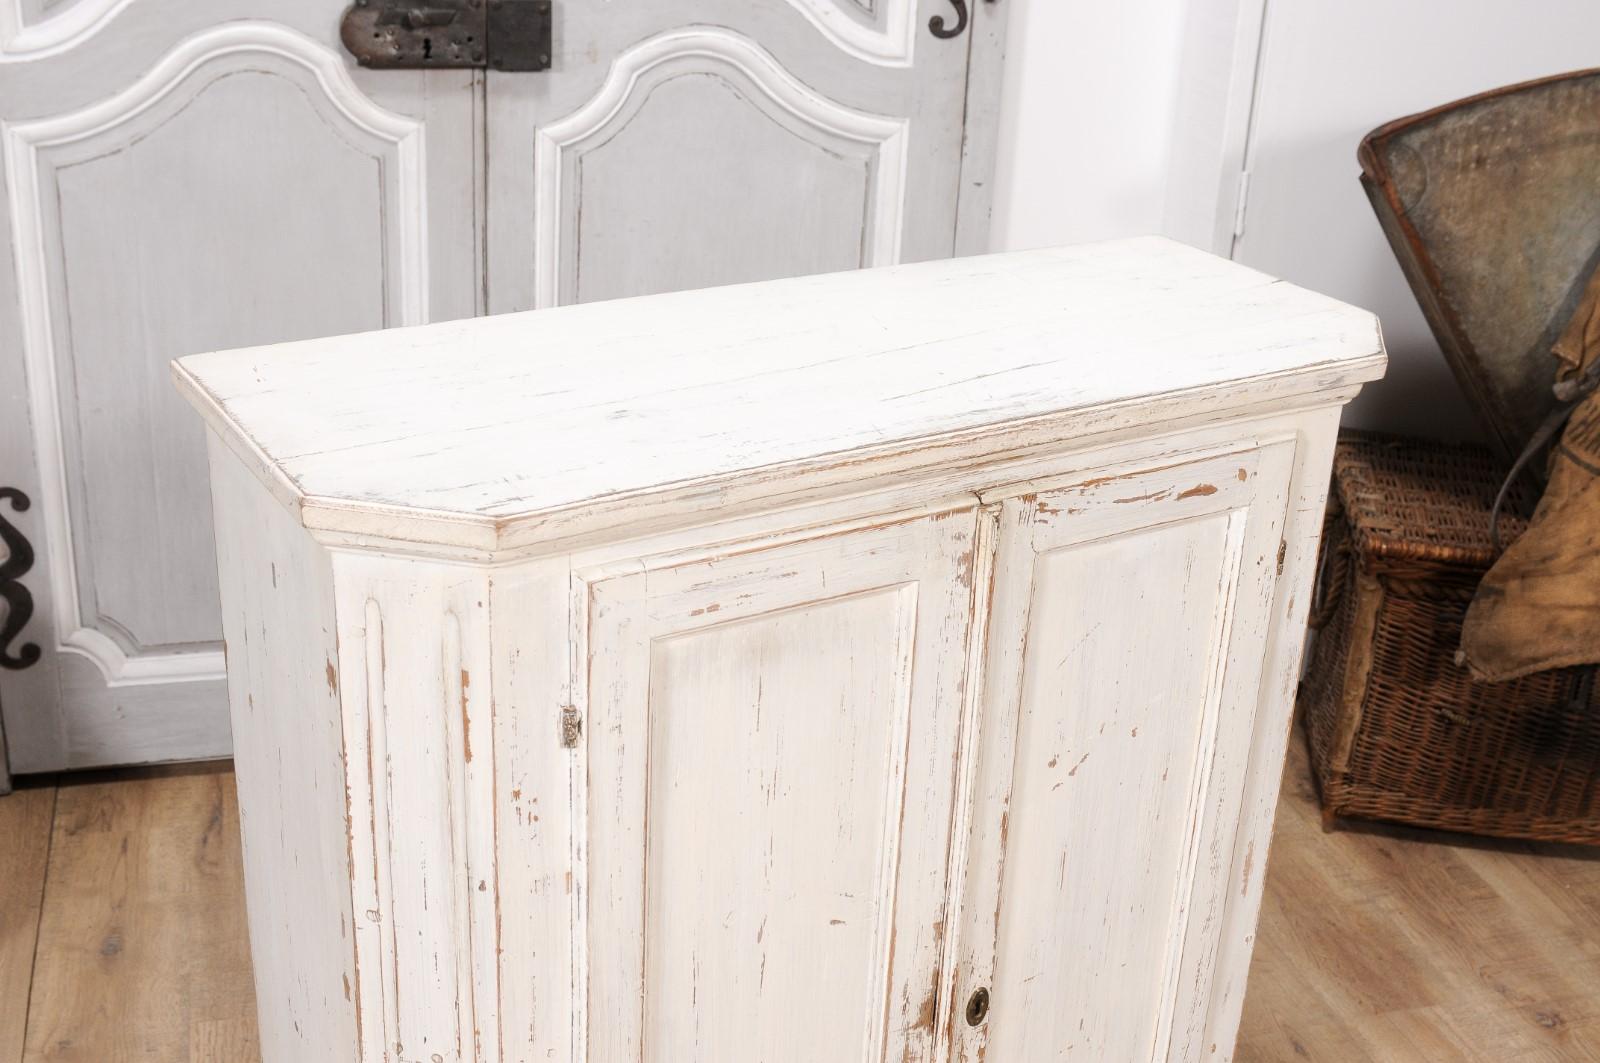 1830s Swedish Off-White Painted Wood Narrow Sideboard with Distressed Finish In Good Condition For Sale In Atlanta, GA